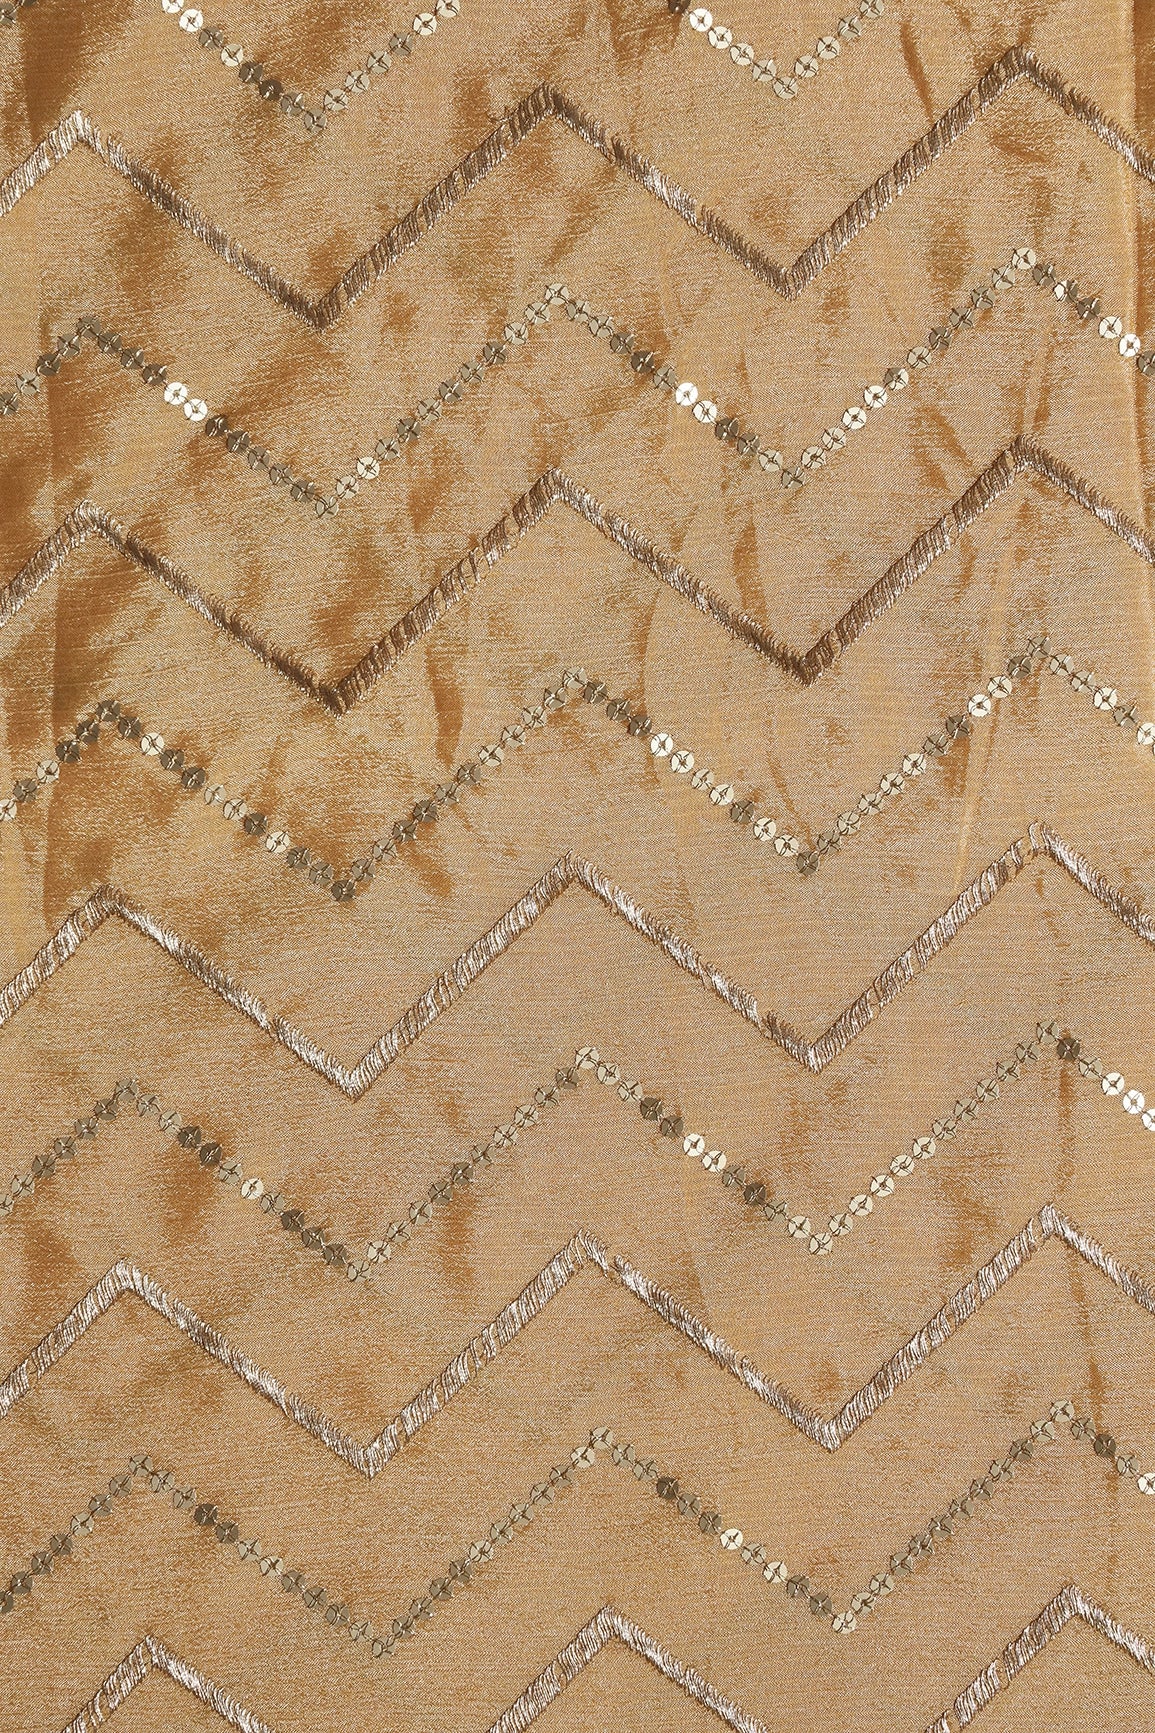 Gold Zari With Gold Sequins Chevron Embroidery Work On Beige Chinnon Chiffon Fabric